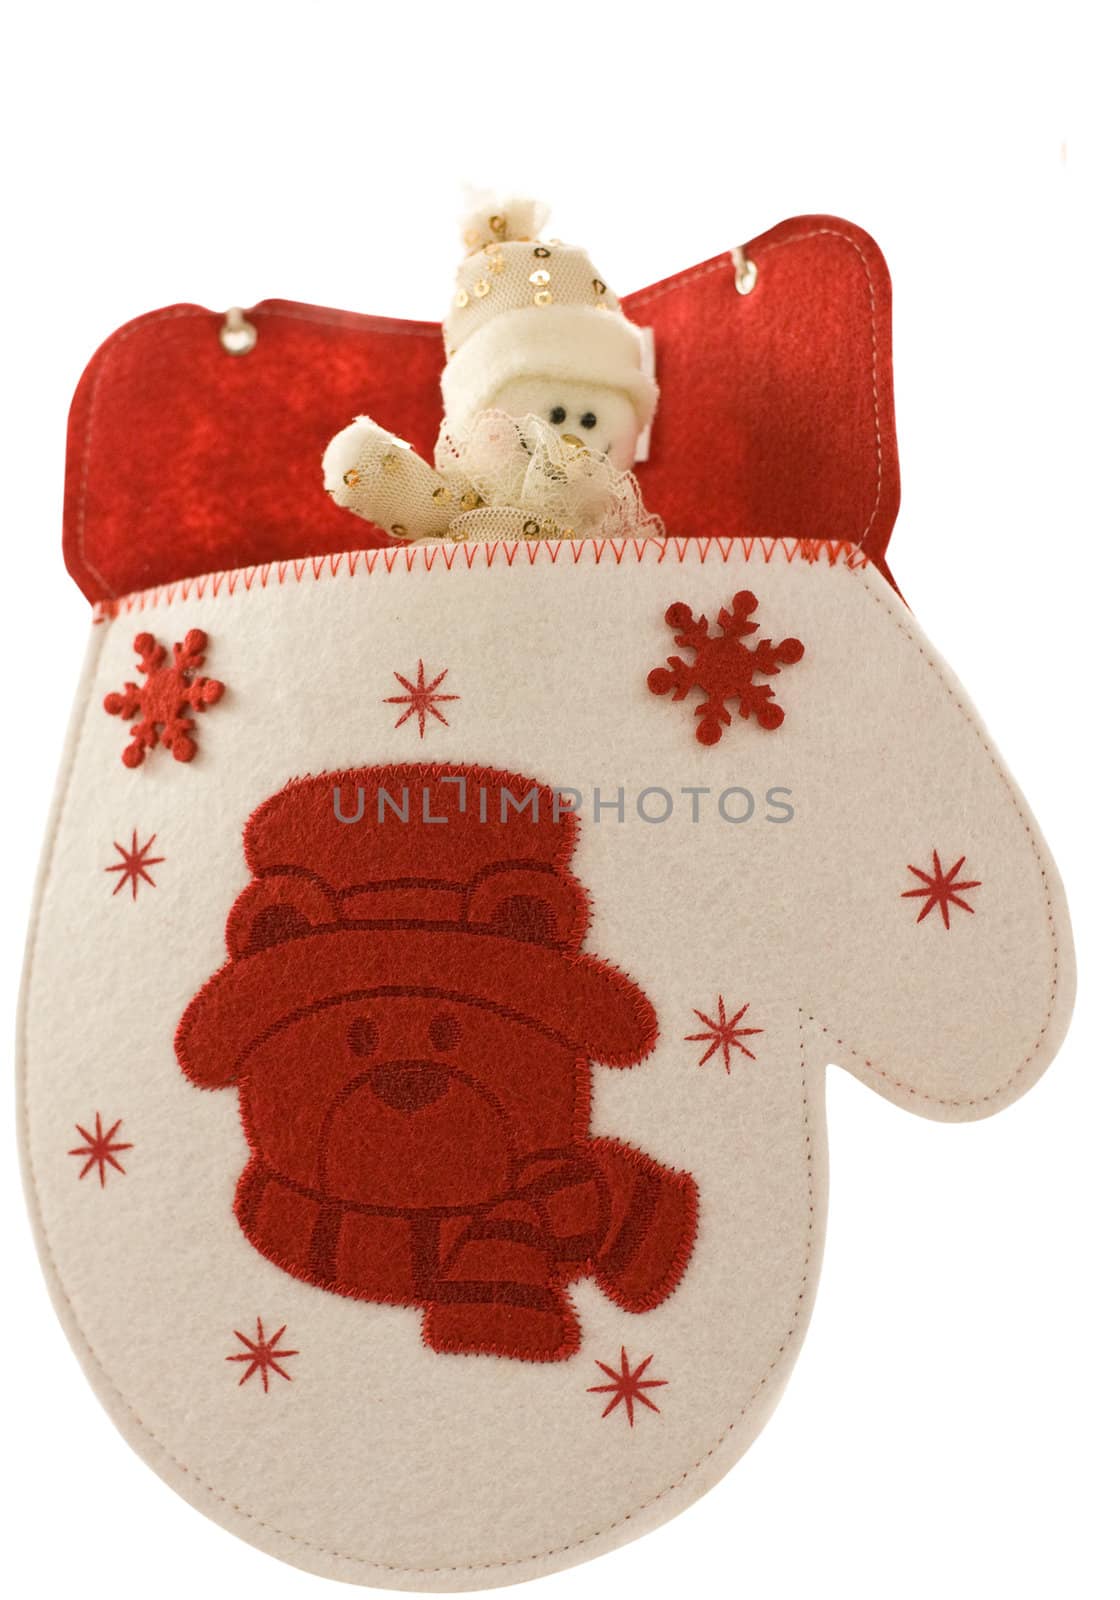 Christmas mitten with little snowman by rozhenyuk